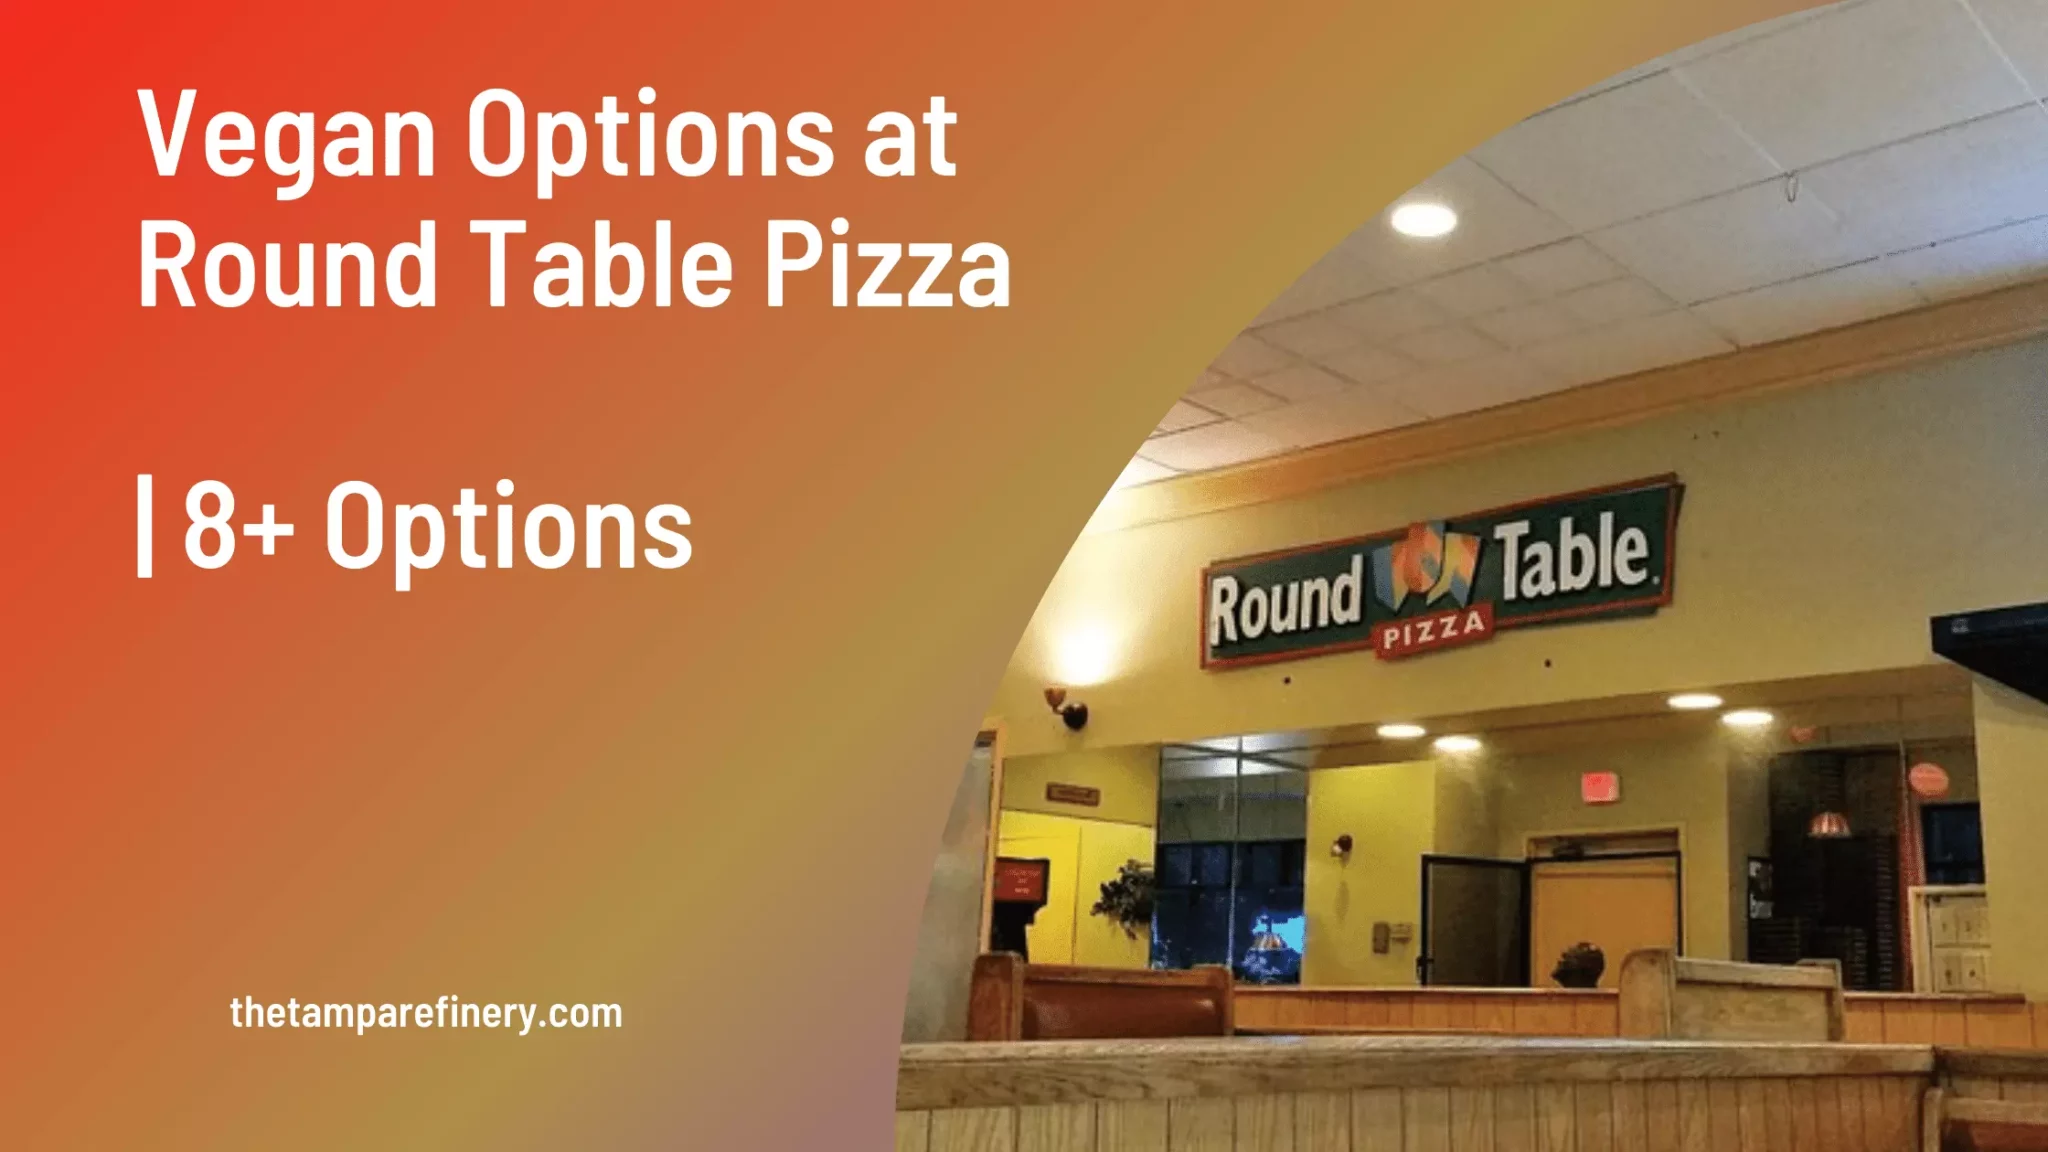 Vegan Options at Round Table Pizza